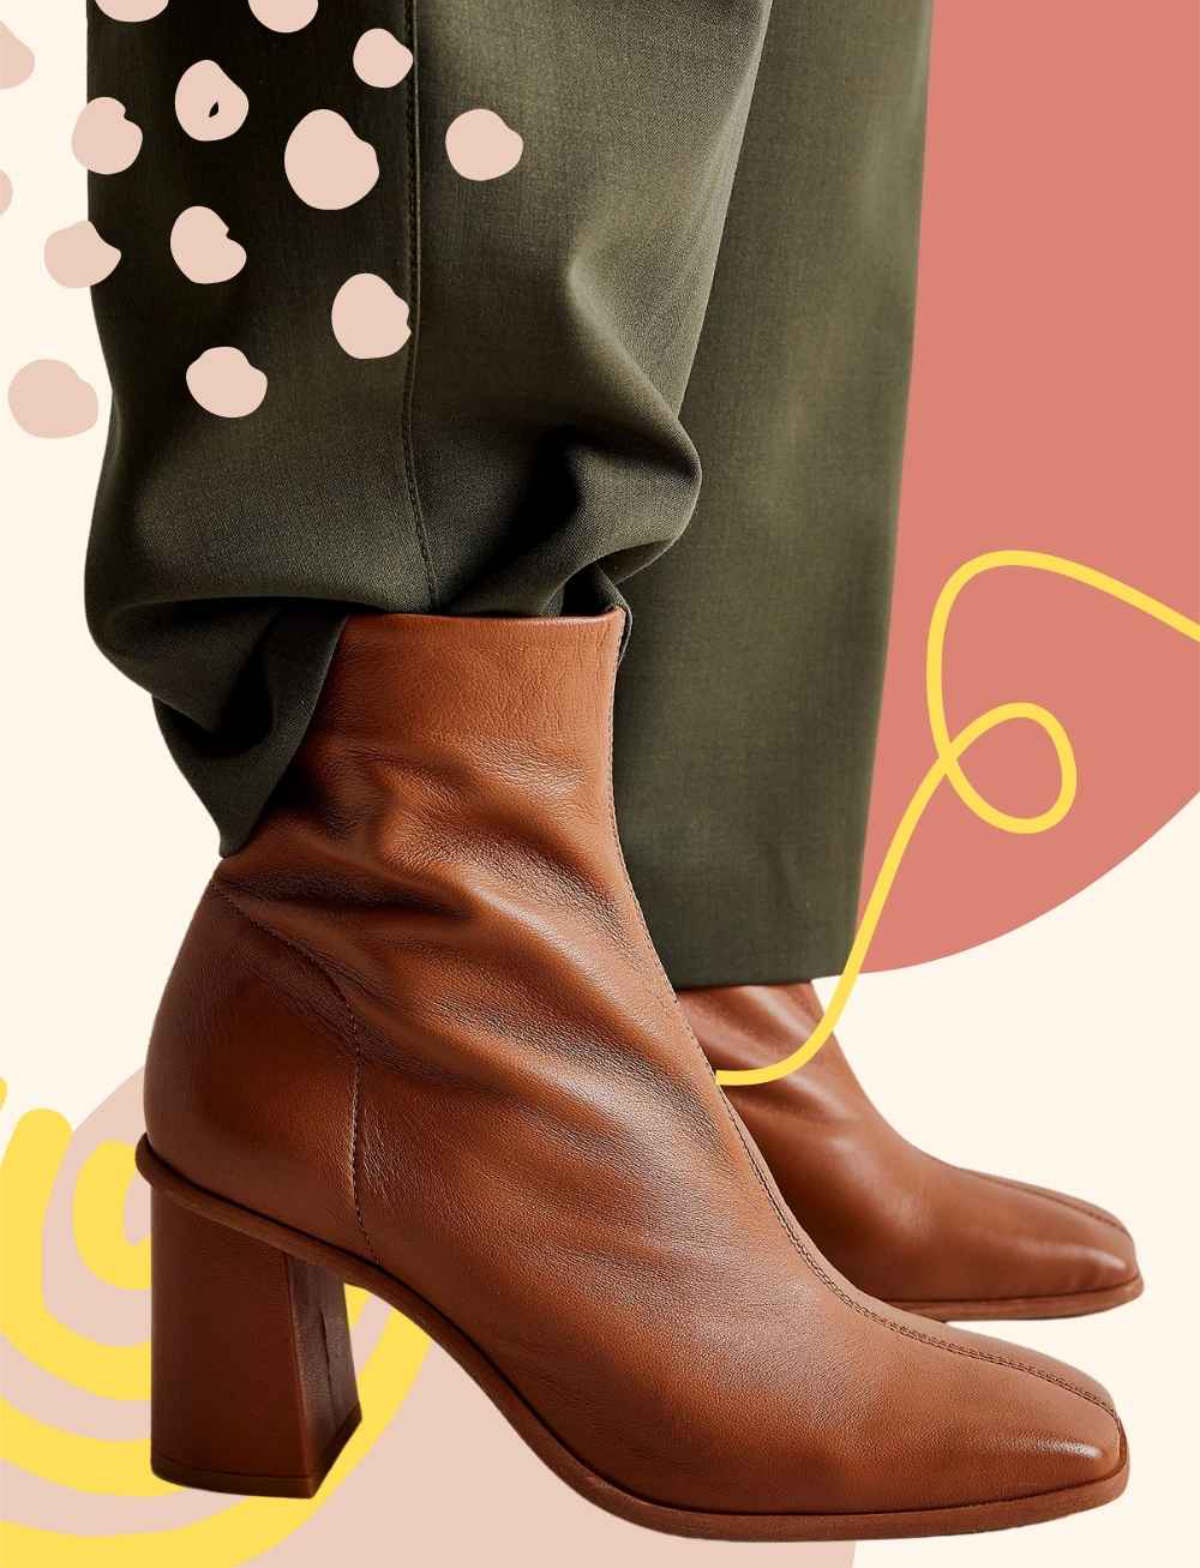 How to Wear Ankle Boots with Dress - A Woman's Guide